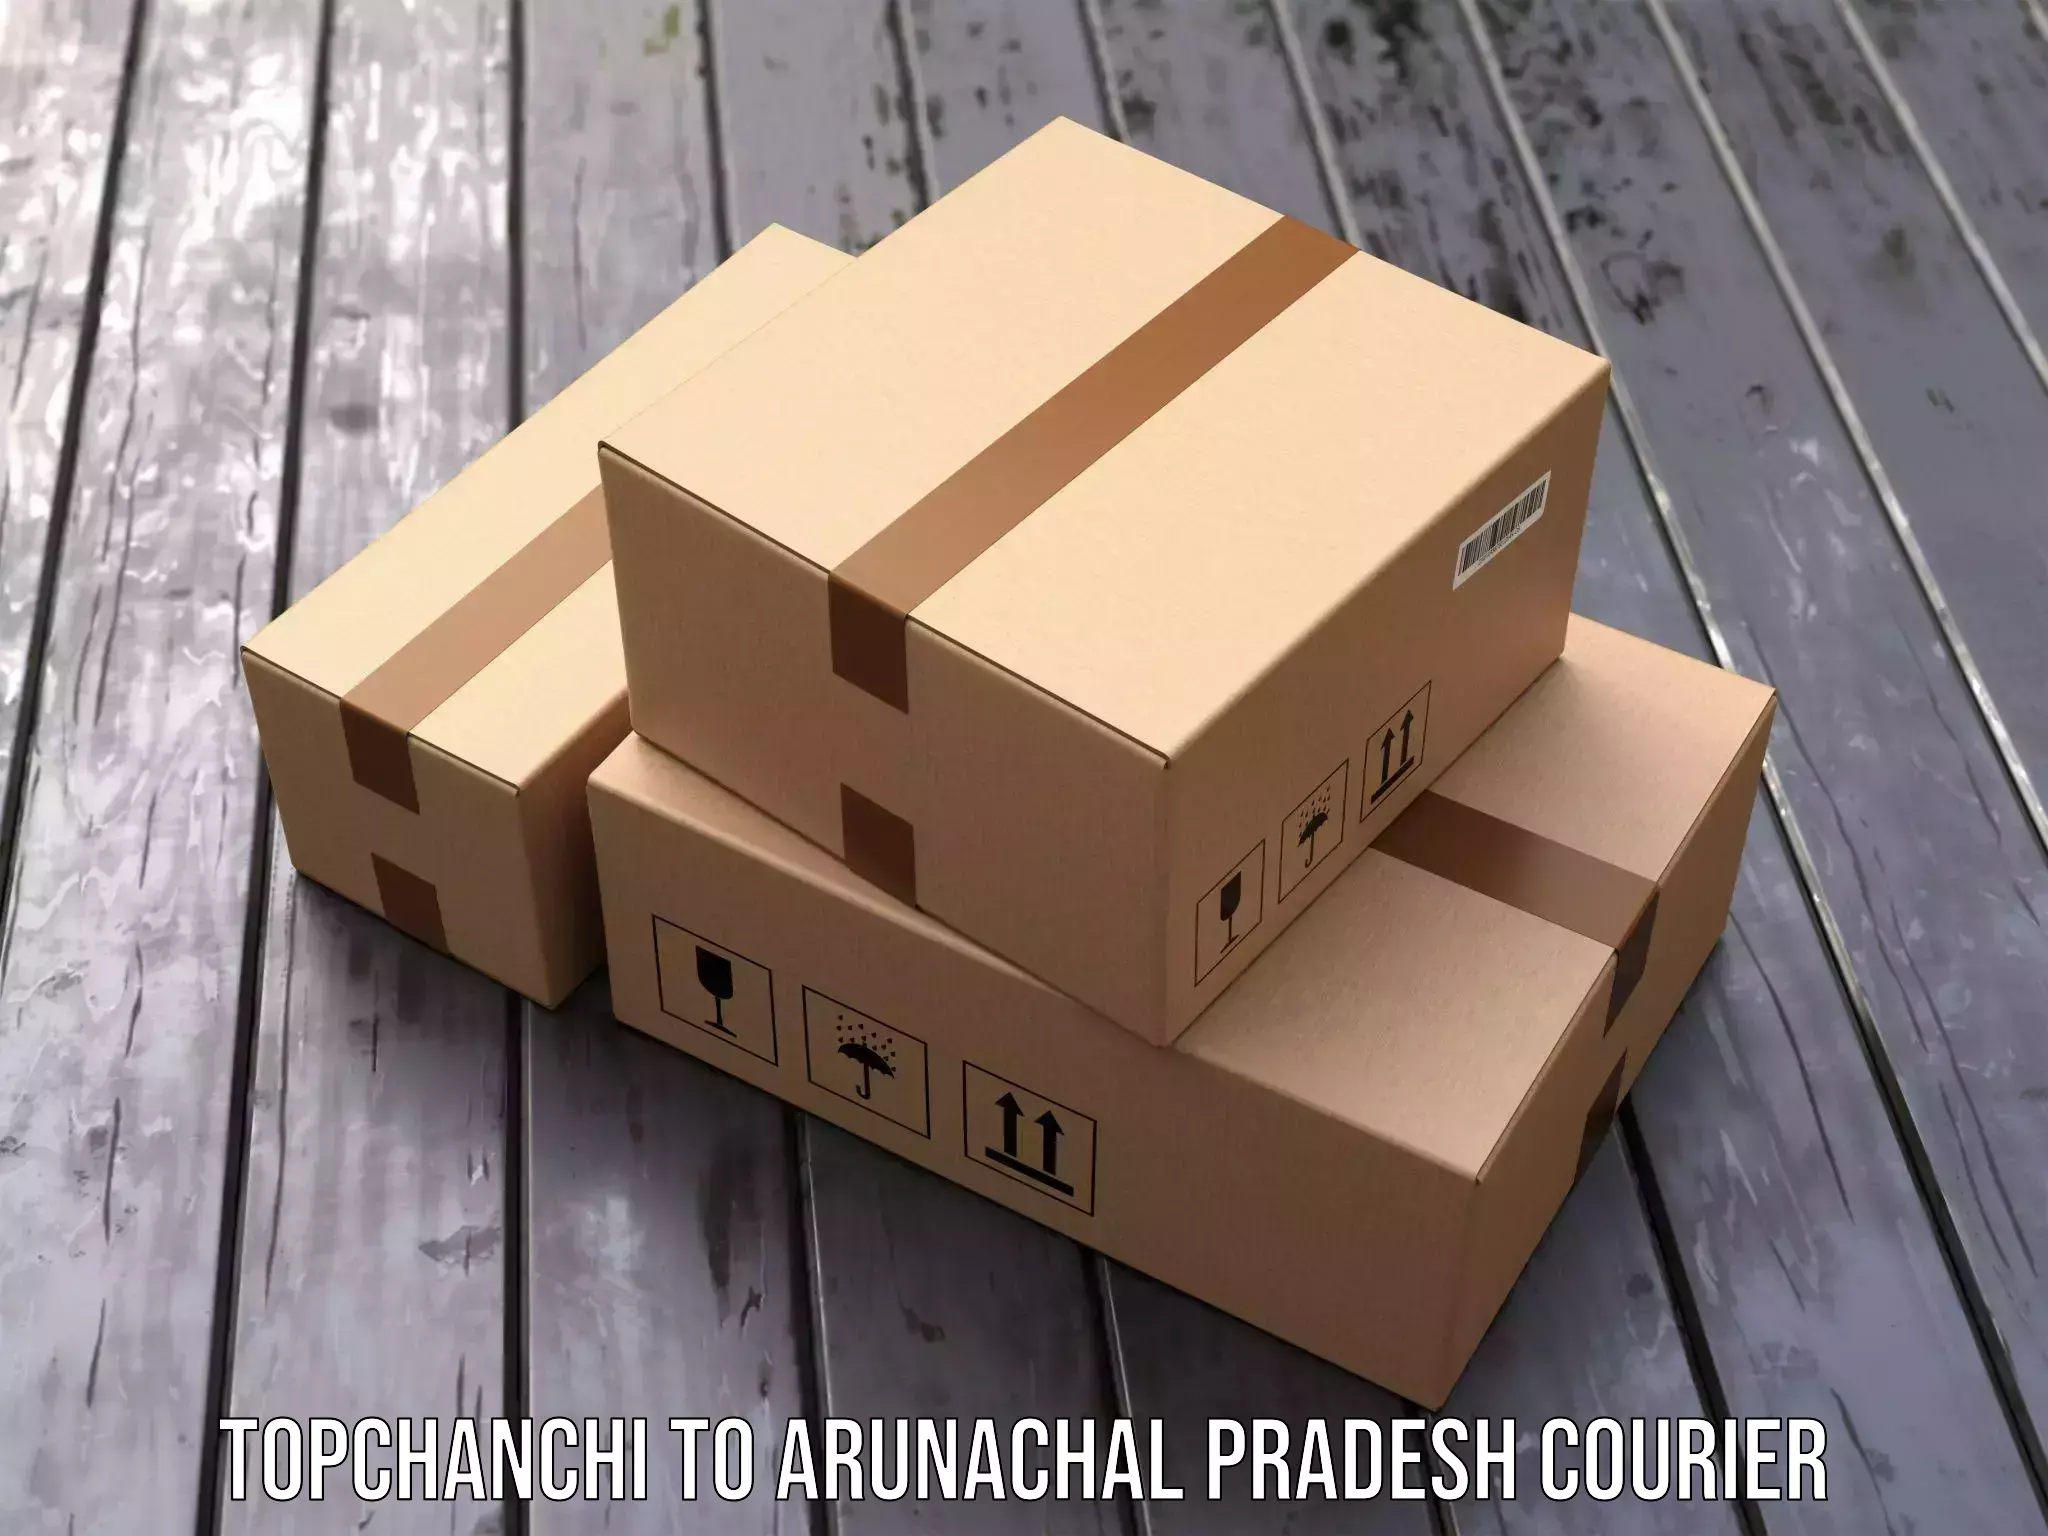 Next-day delivery options in Topchanchi to Tirap